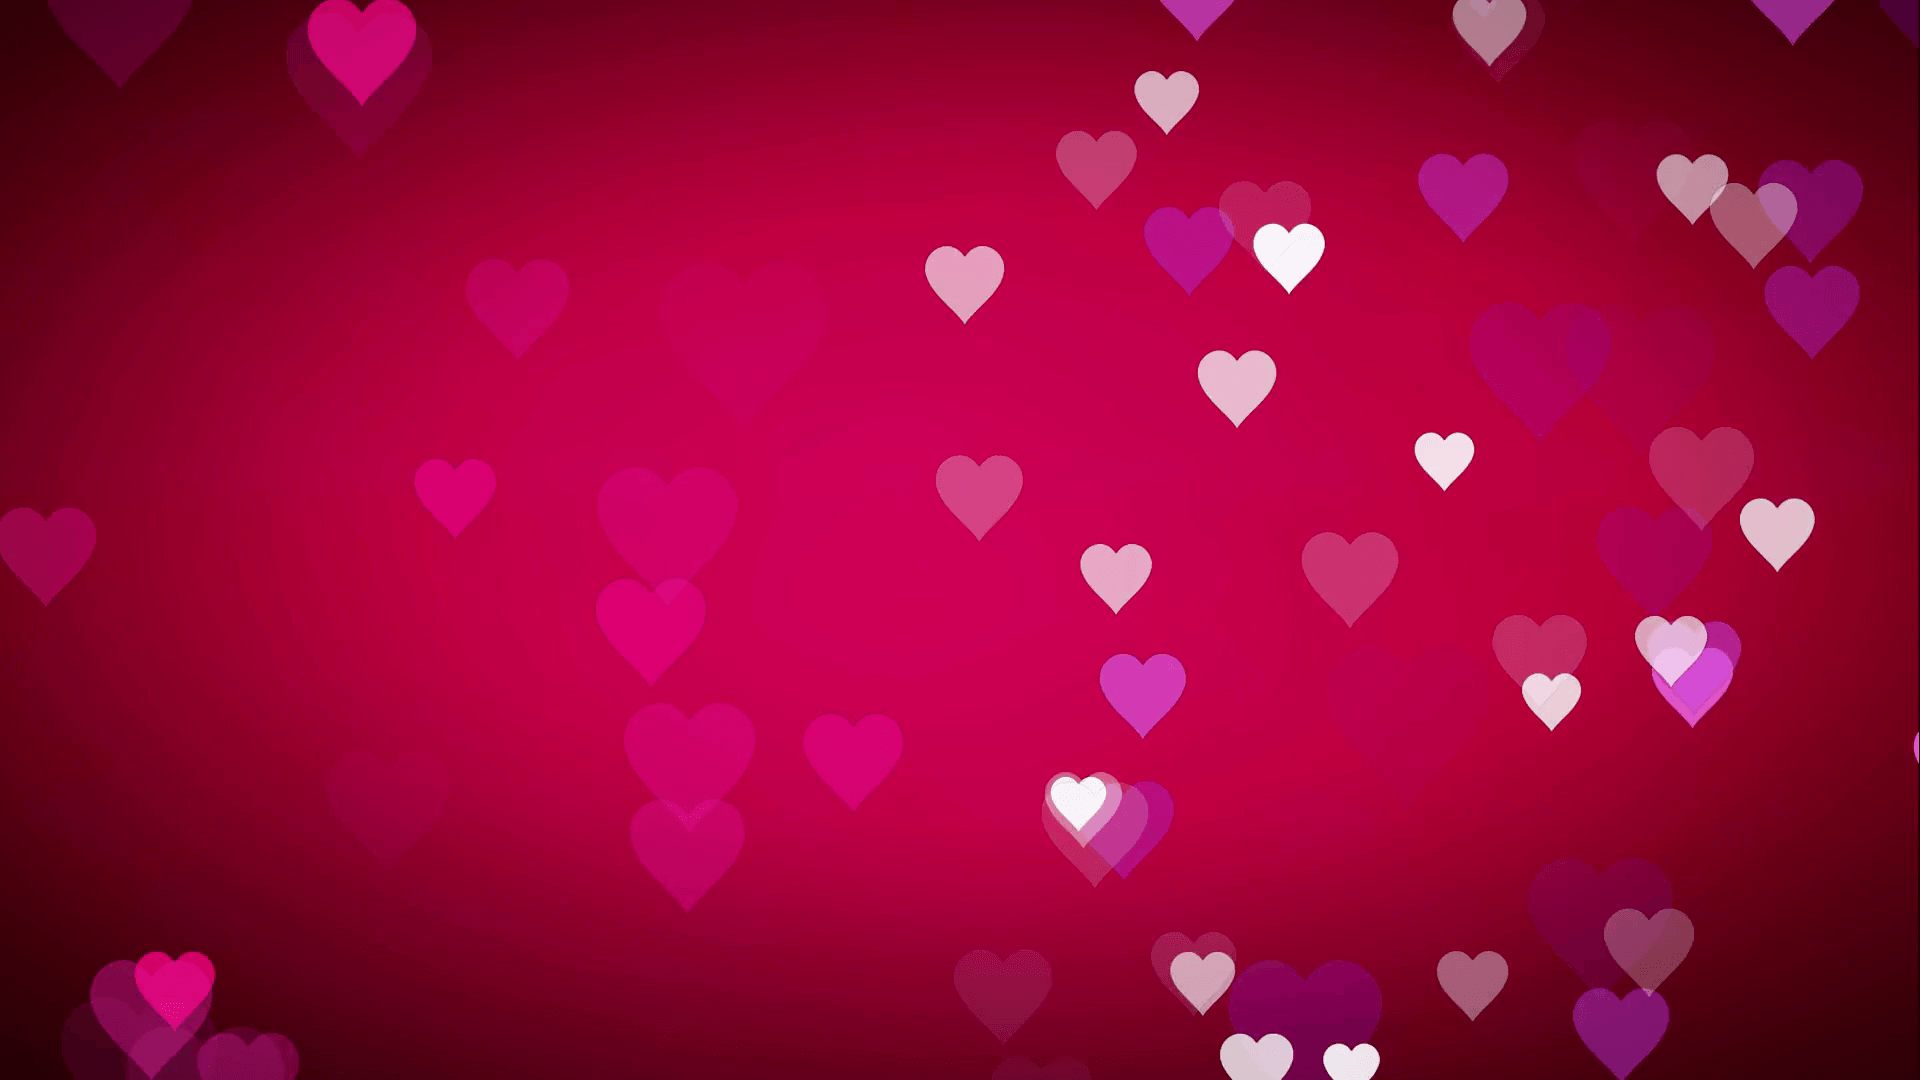 Animated many moving small pink purple white hearts on pink black